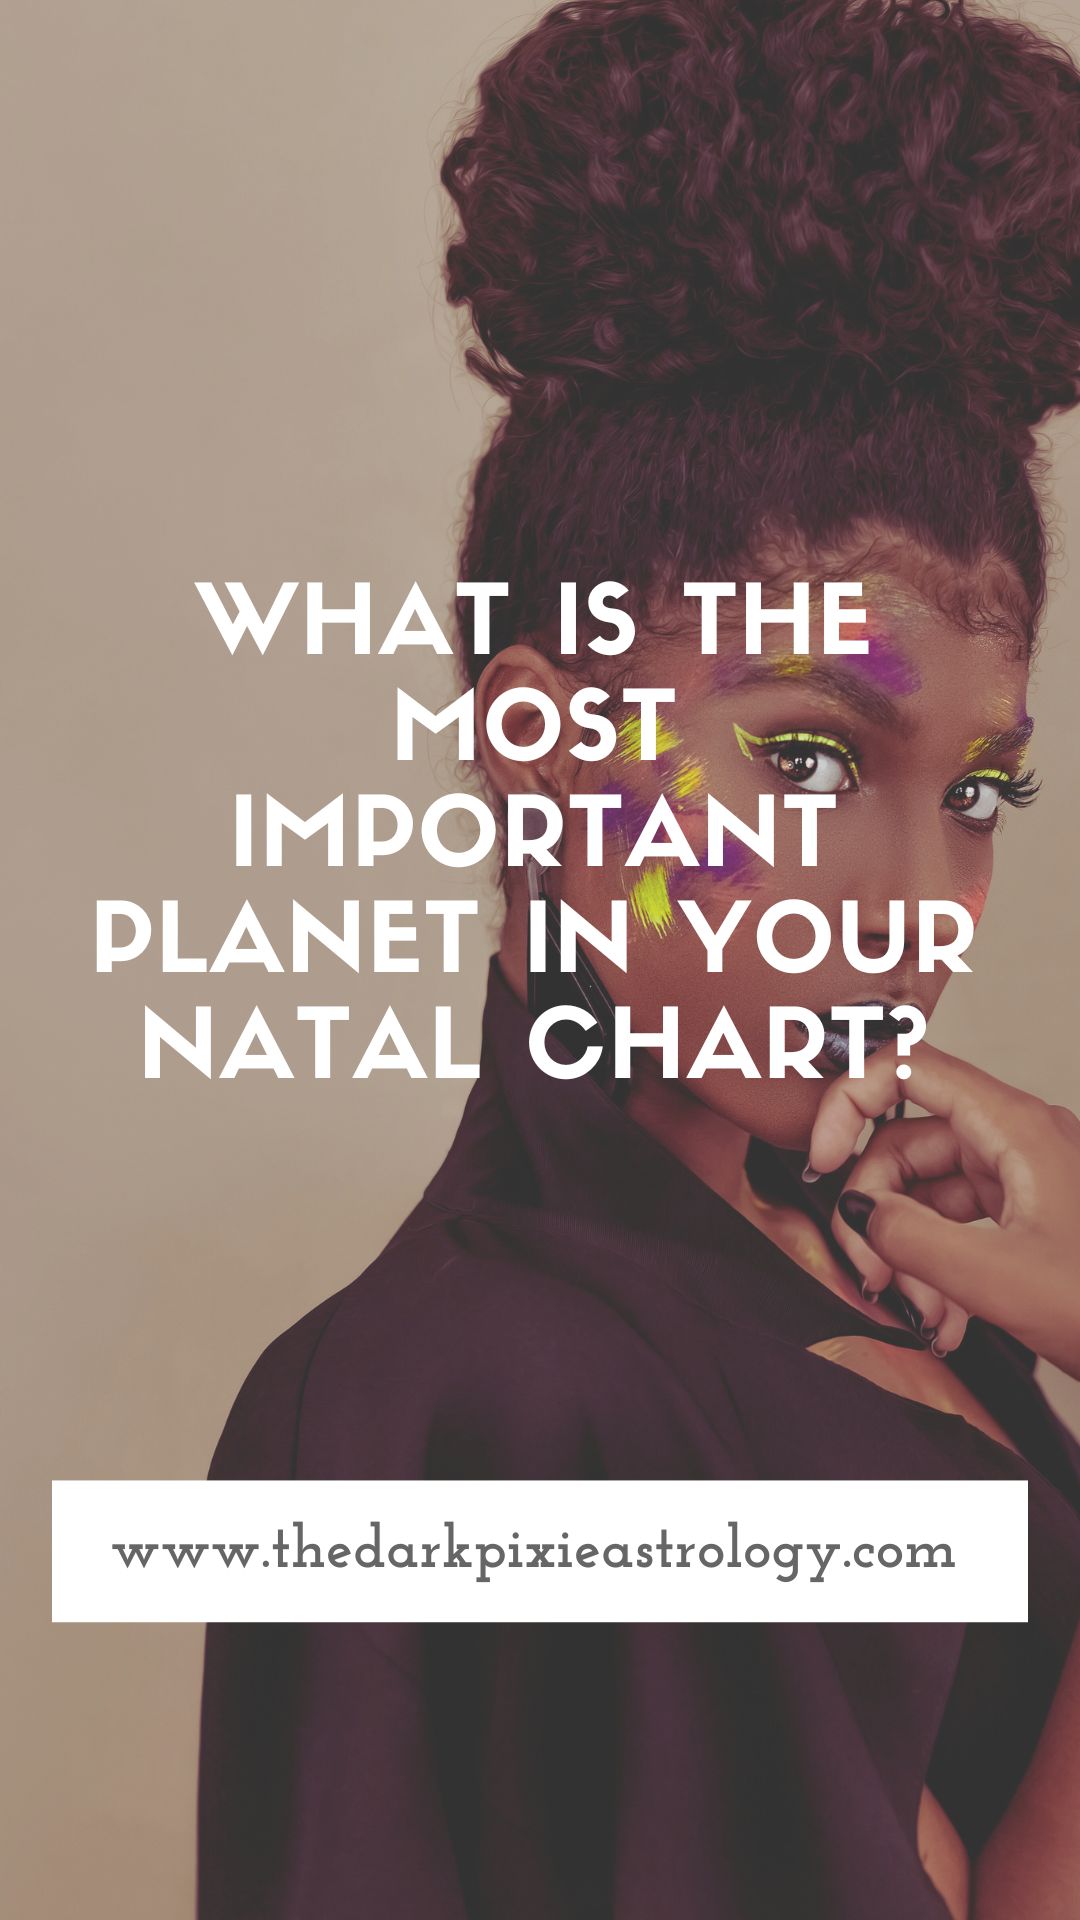 What is the Most Important Planet in Your Natal Chart? - The Dark Pixie Astrology